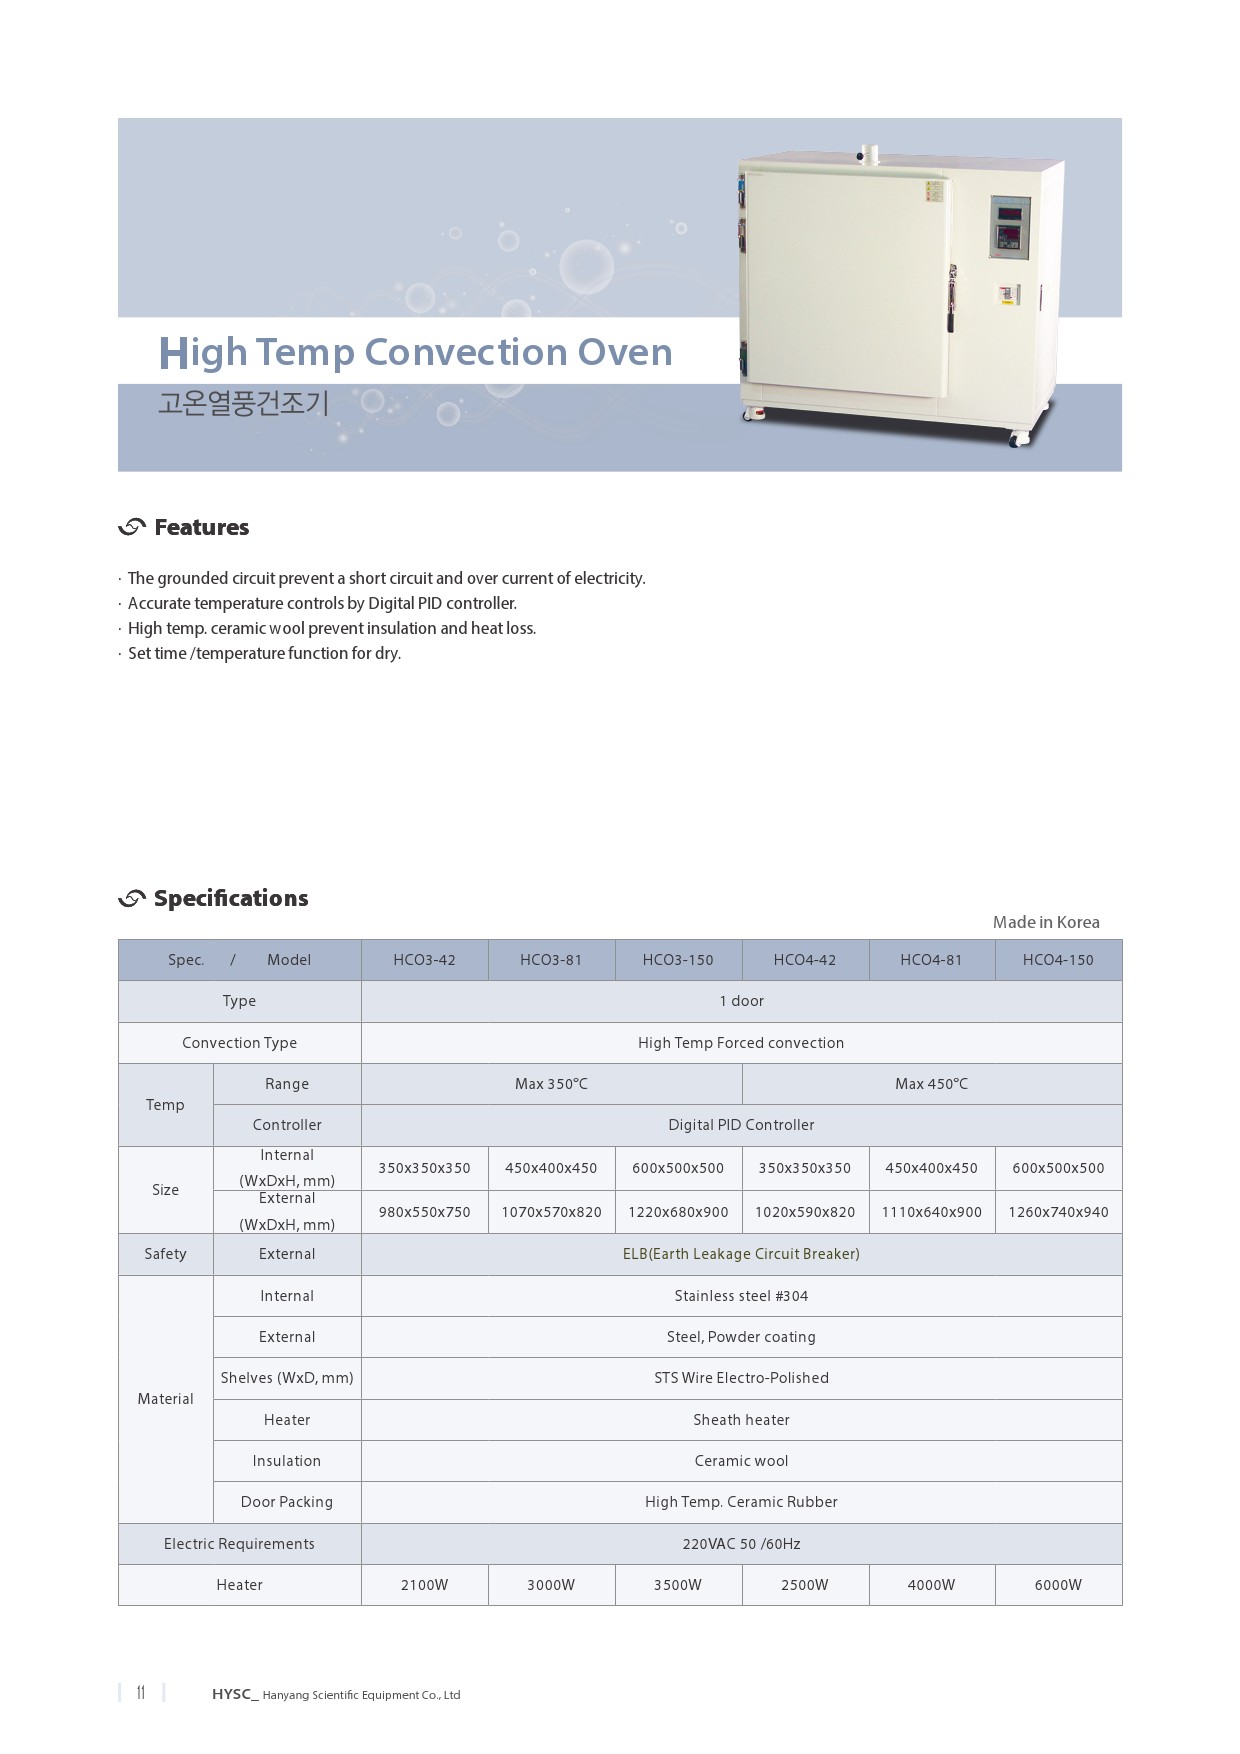 HYSC_Introduction_High Temp Convection Oven-1.jpg